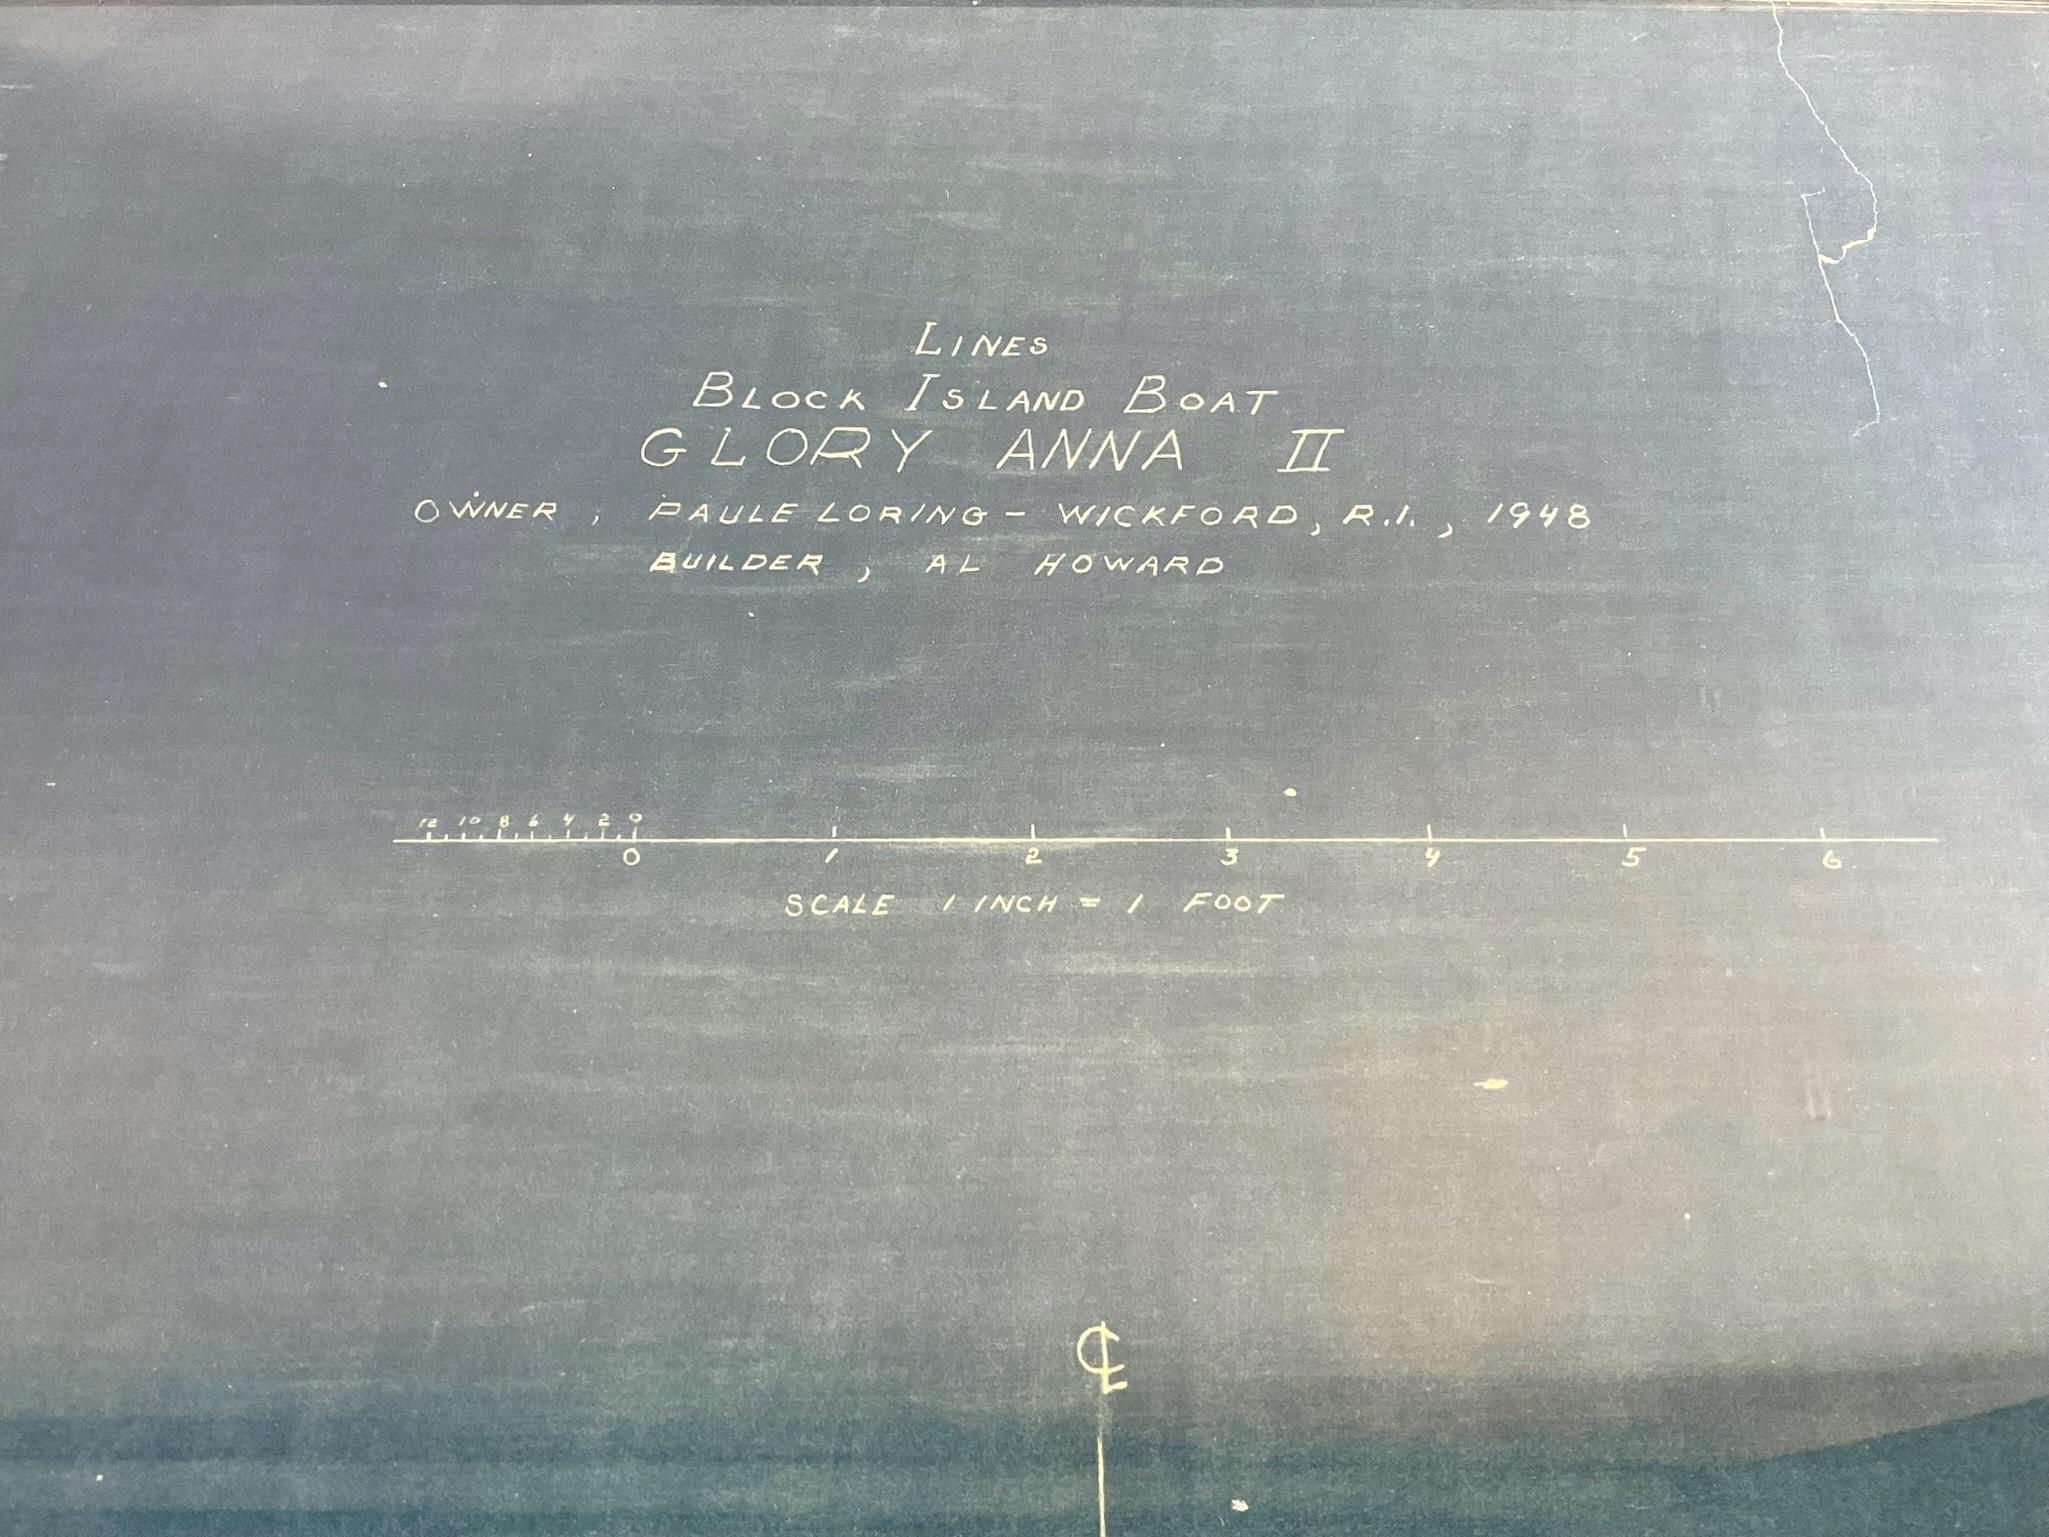 Mid-20th Century Block Island Boat Blueprint from Wickford R.I. For Sale